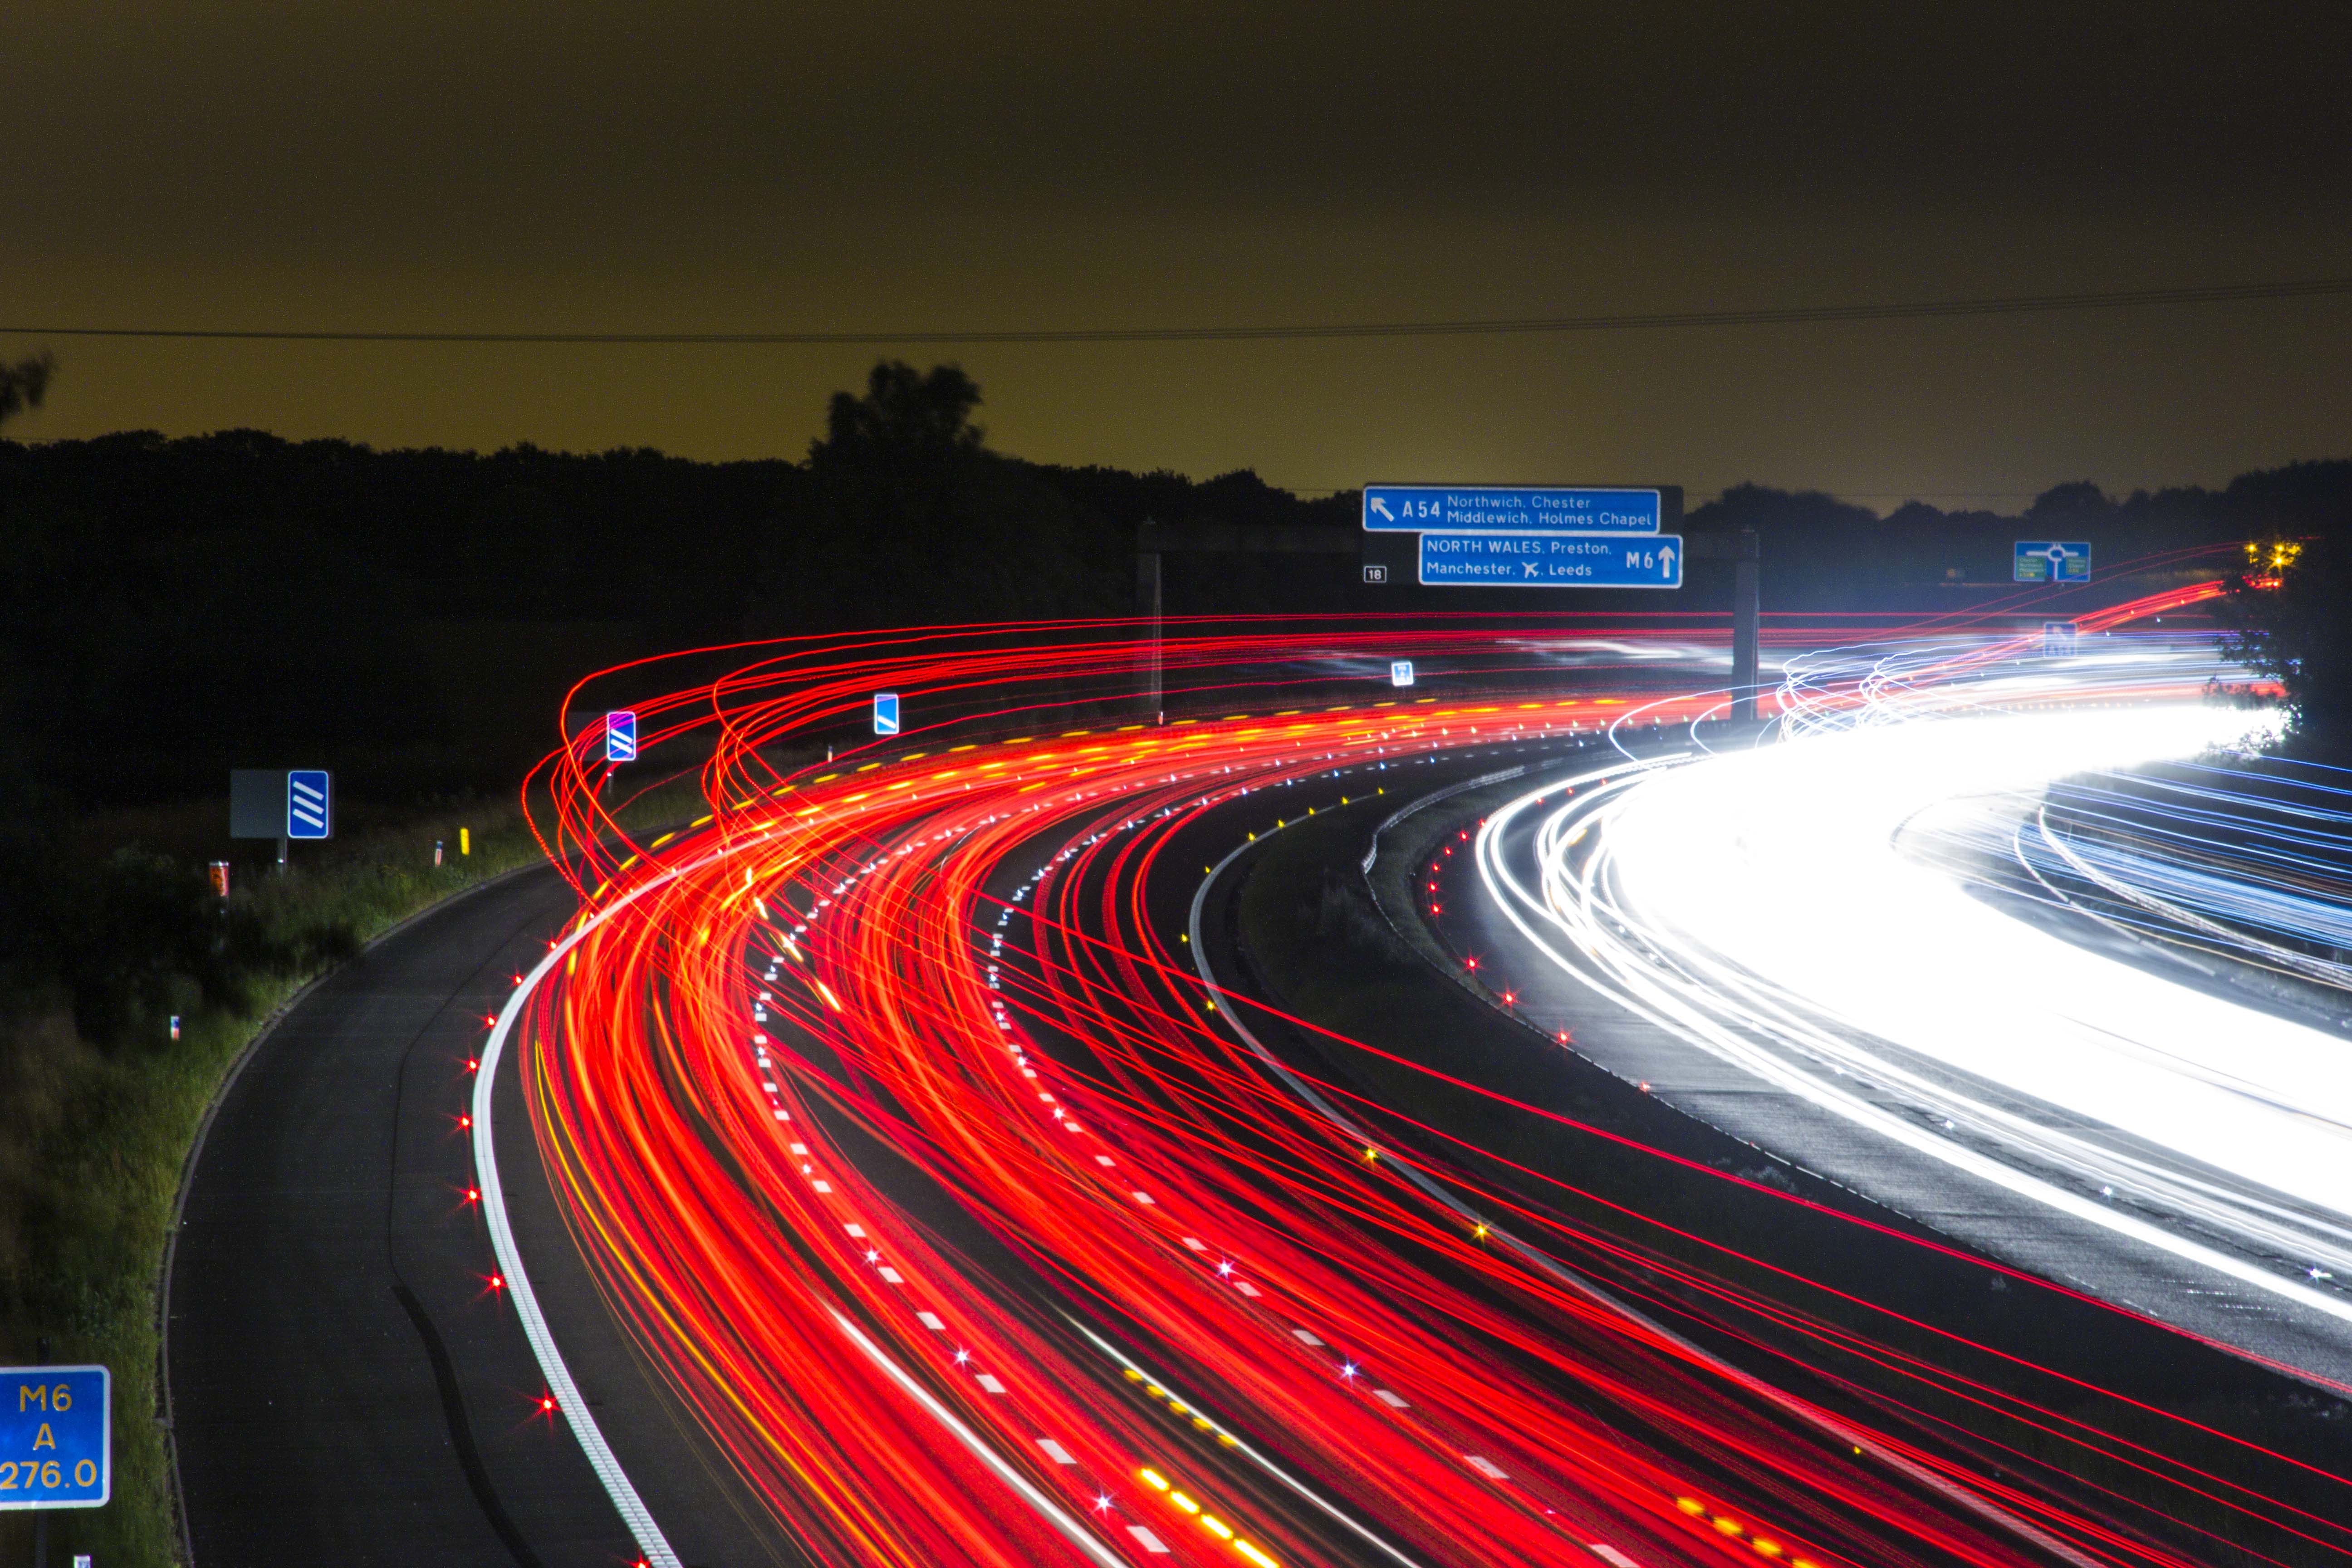 Time lapse photography of car passing by the winding road during nighttime